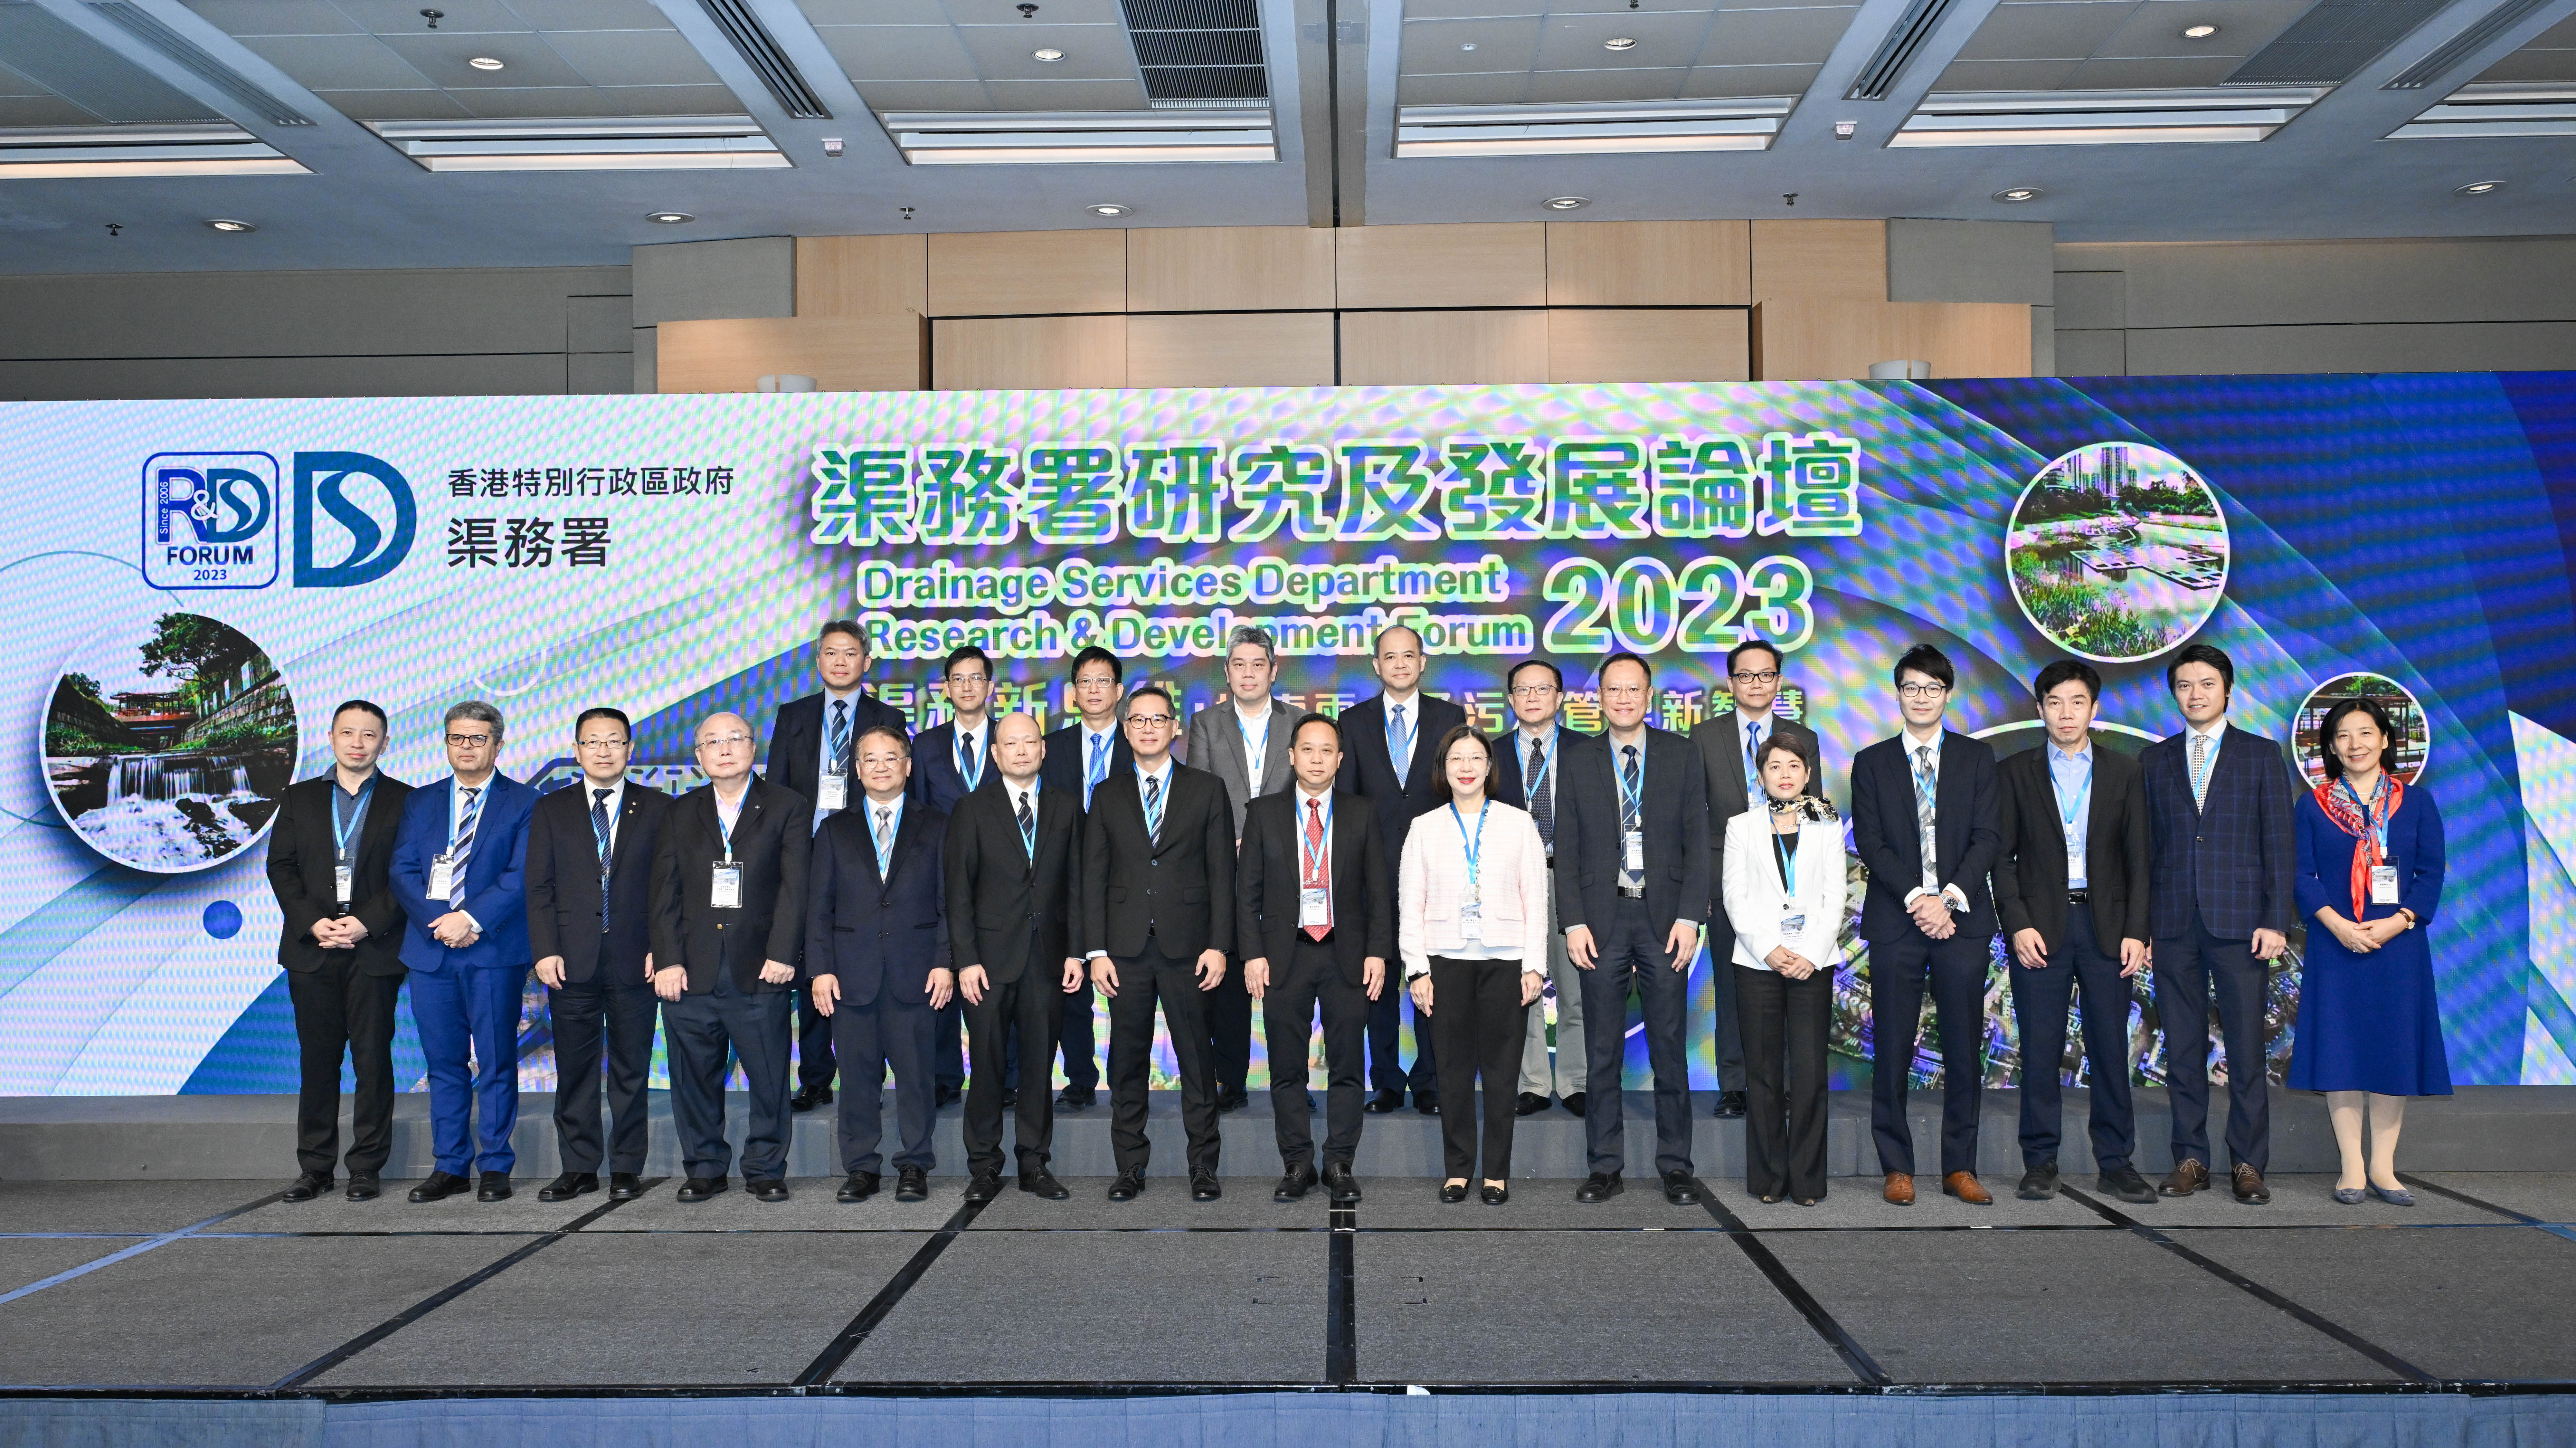 Group photo of Mr YE Shui -qiu (front row, eighth left), the Deputy Director-General of the Department of Educational, Scientific and Technological Affairs of the Liaison Office of the Central People's Government in the Hong Kong Special Administrative Region (LOCPG); Mr Ricky LAU (front row, seventh left), the Permanent Secretary for Development (Works); Miss Janice TSE (front row, seventh right), the Permanent Secretary for Environment and Ecology (Environment); Mr Peter CHUI Si-kay (front row, sixth right), Acting Director of Drainage Services; Dr Samuel CHUI (front row, fifth left), Director of Environmental Protection; Mr Brian CHOI Wing-hing (front row, sixth left), Acting Deputy Director of Drainage Services and other officiating guests and speakers.